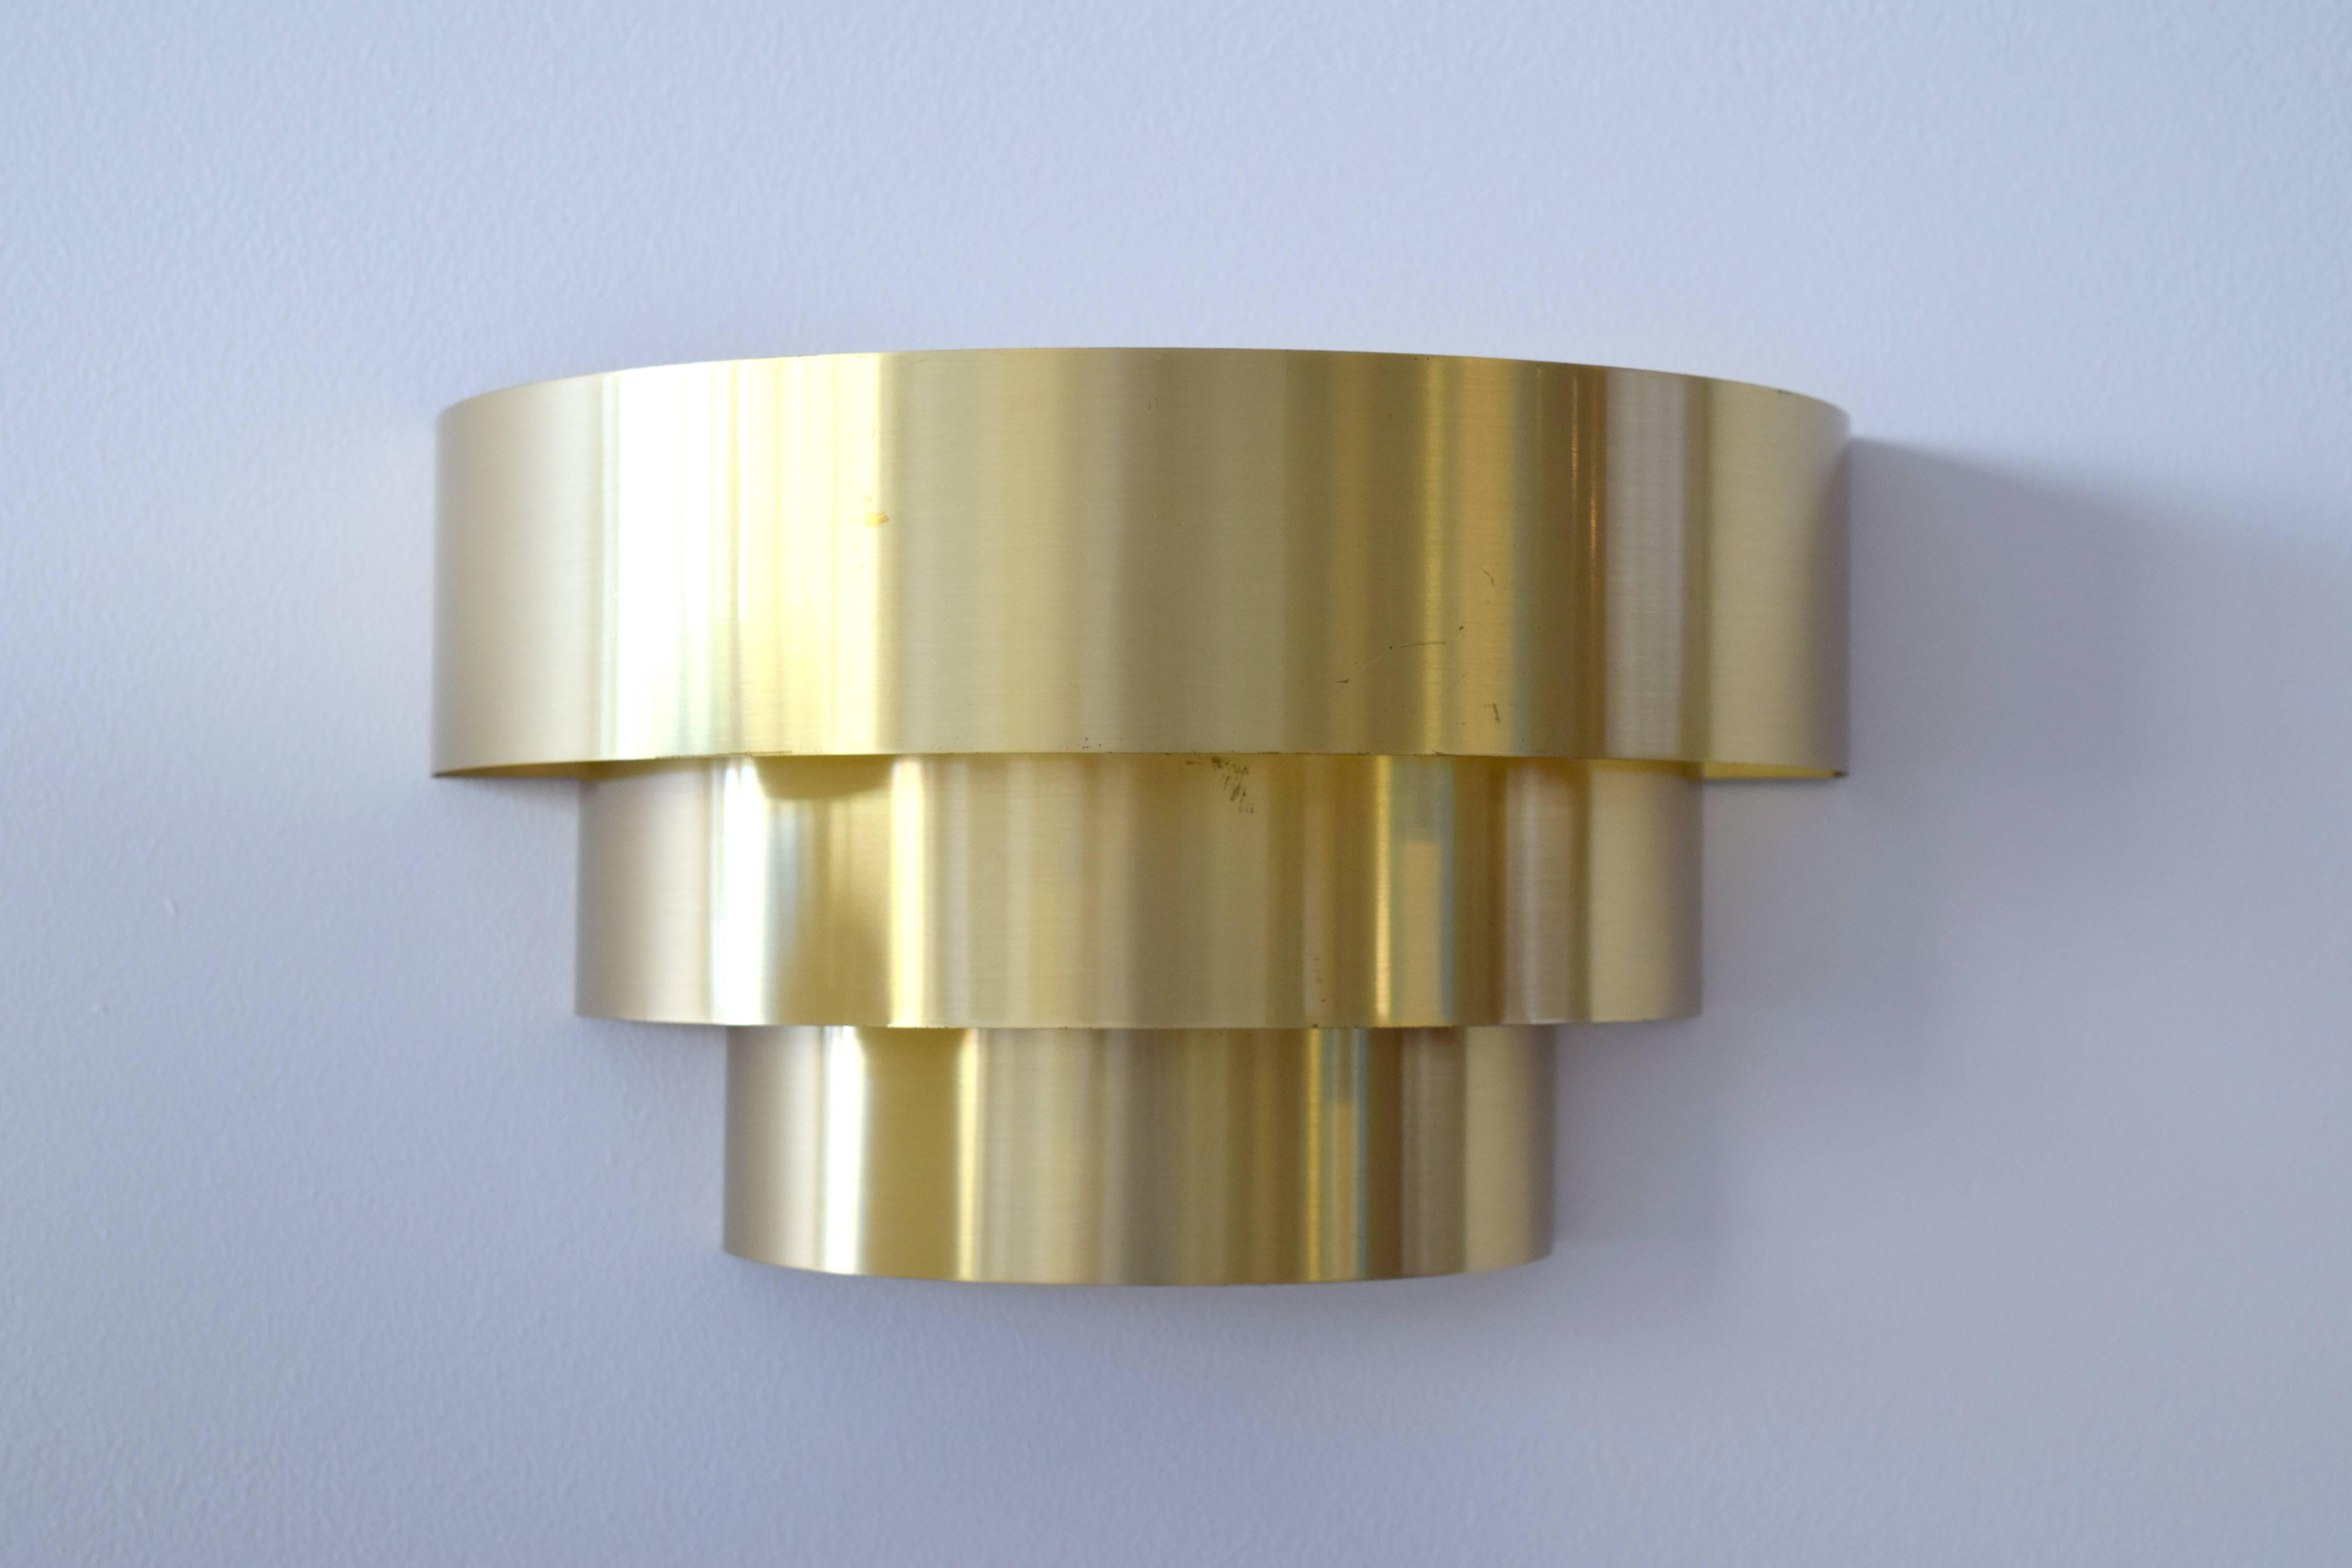 Lovely pair of brass sconces by Lightolier. Three tiers of brass ribbons graduating in size from top at 12